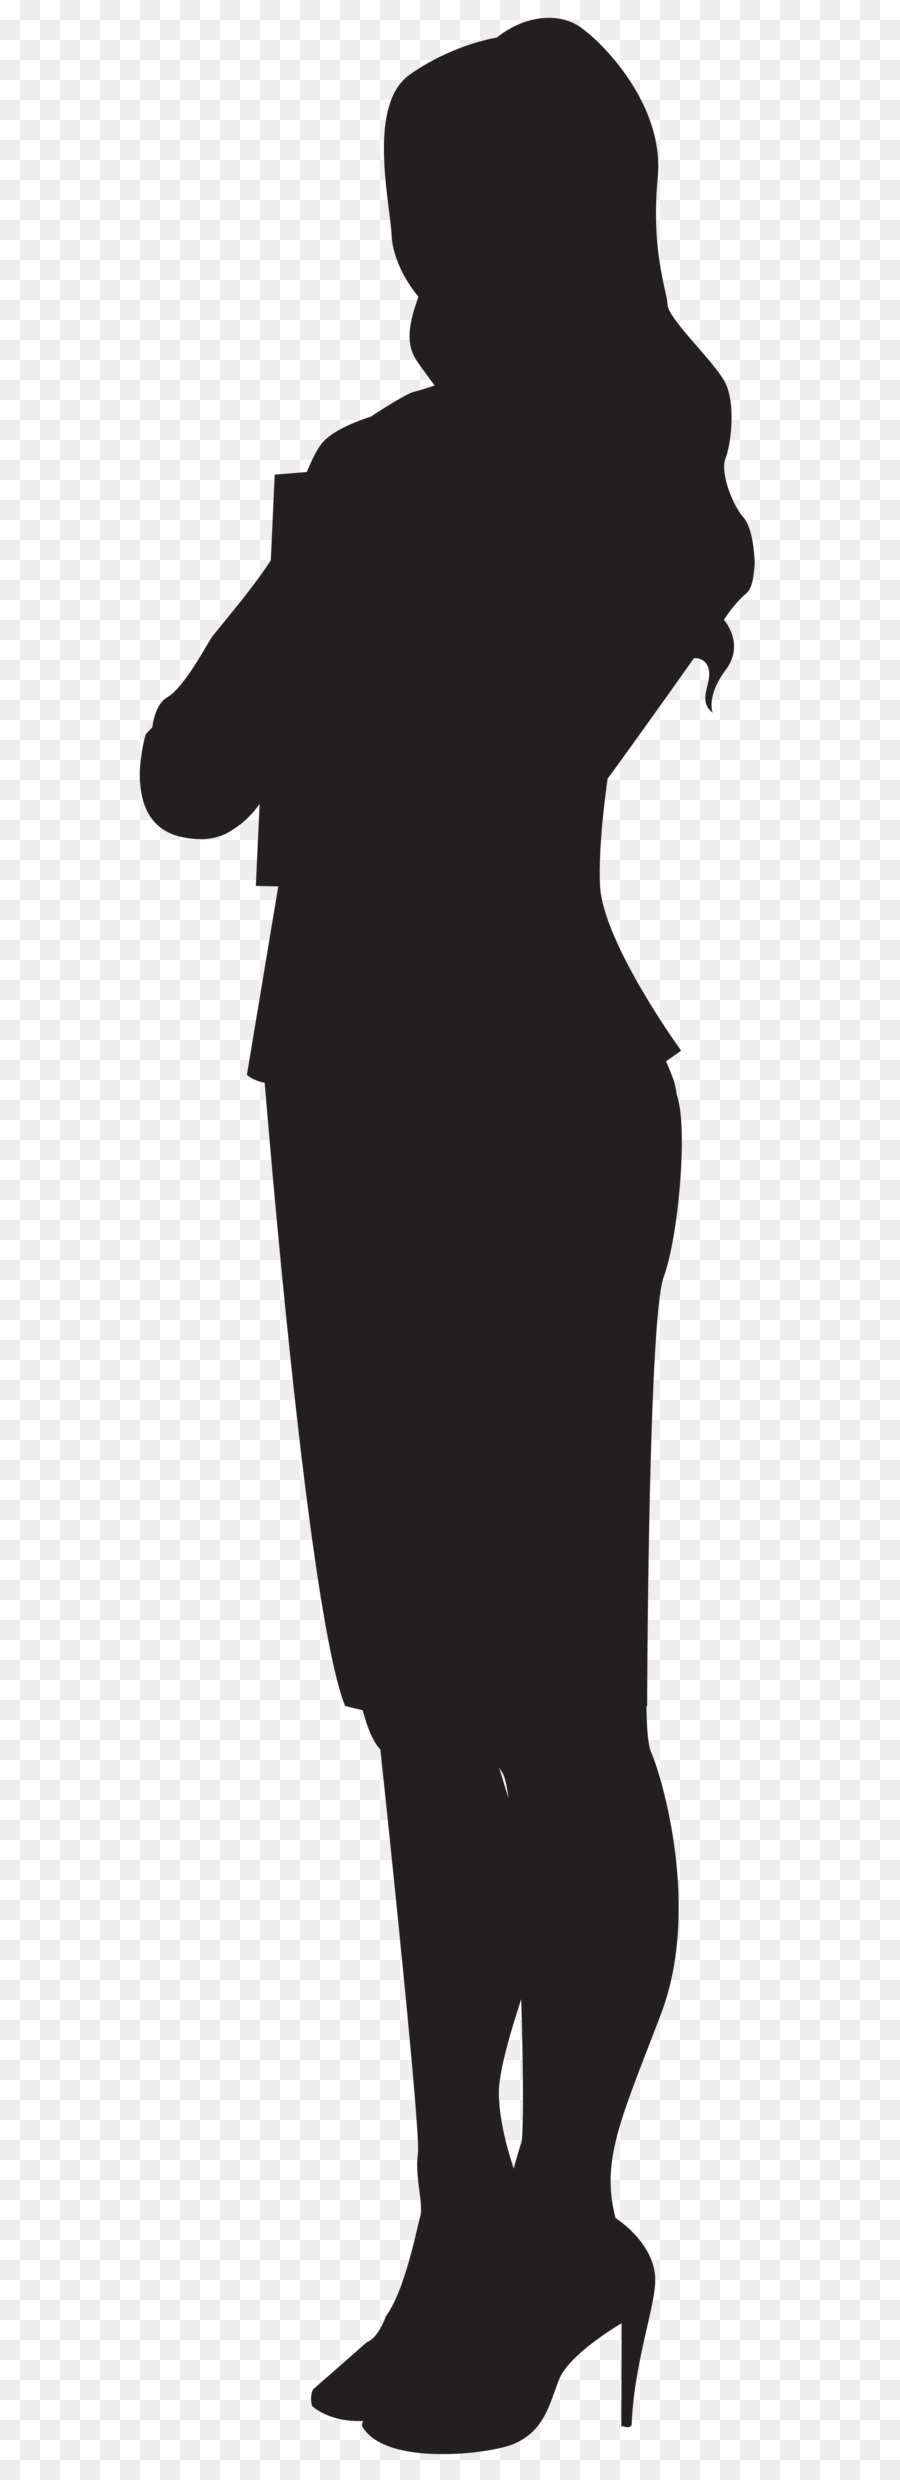 Silhouette Diana Prince Clip art - Woman Silhouette PNG Clip Art Image png download - 2111*8000 - Free Transparent Silhouette png Download.